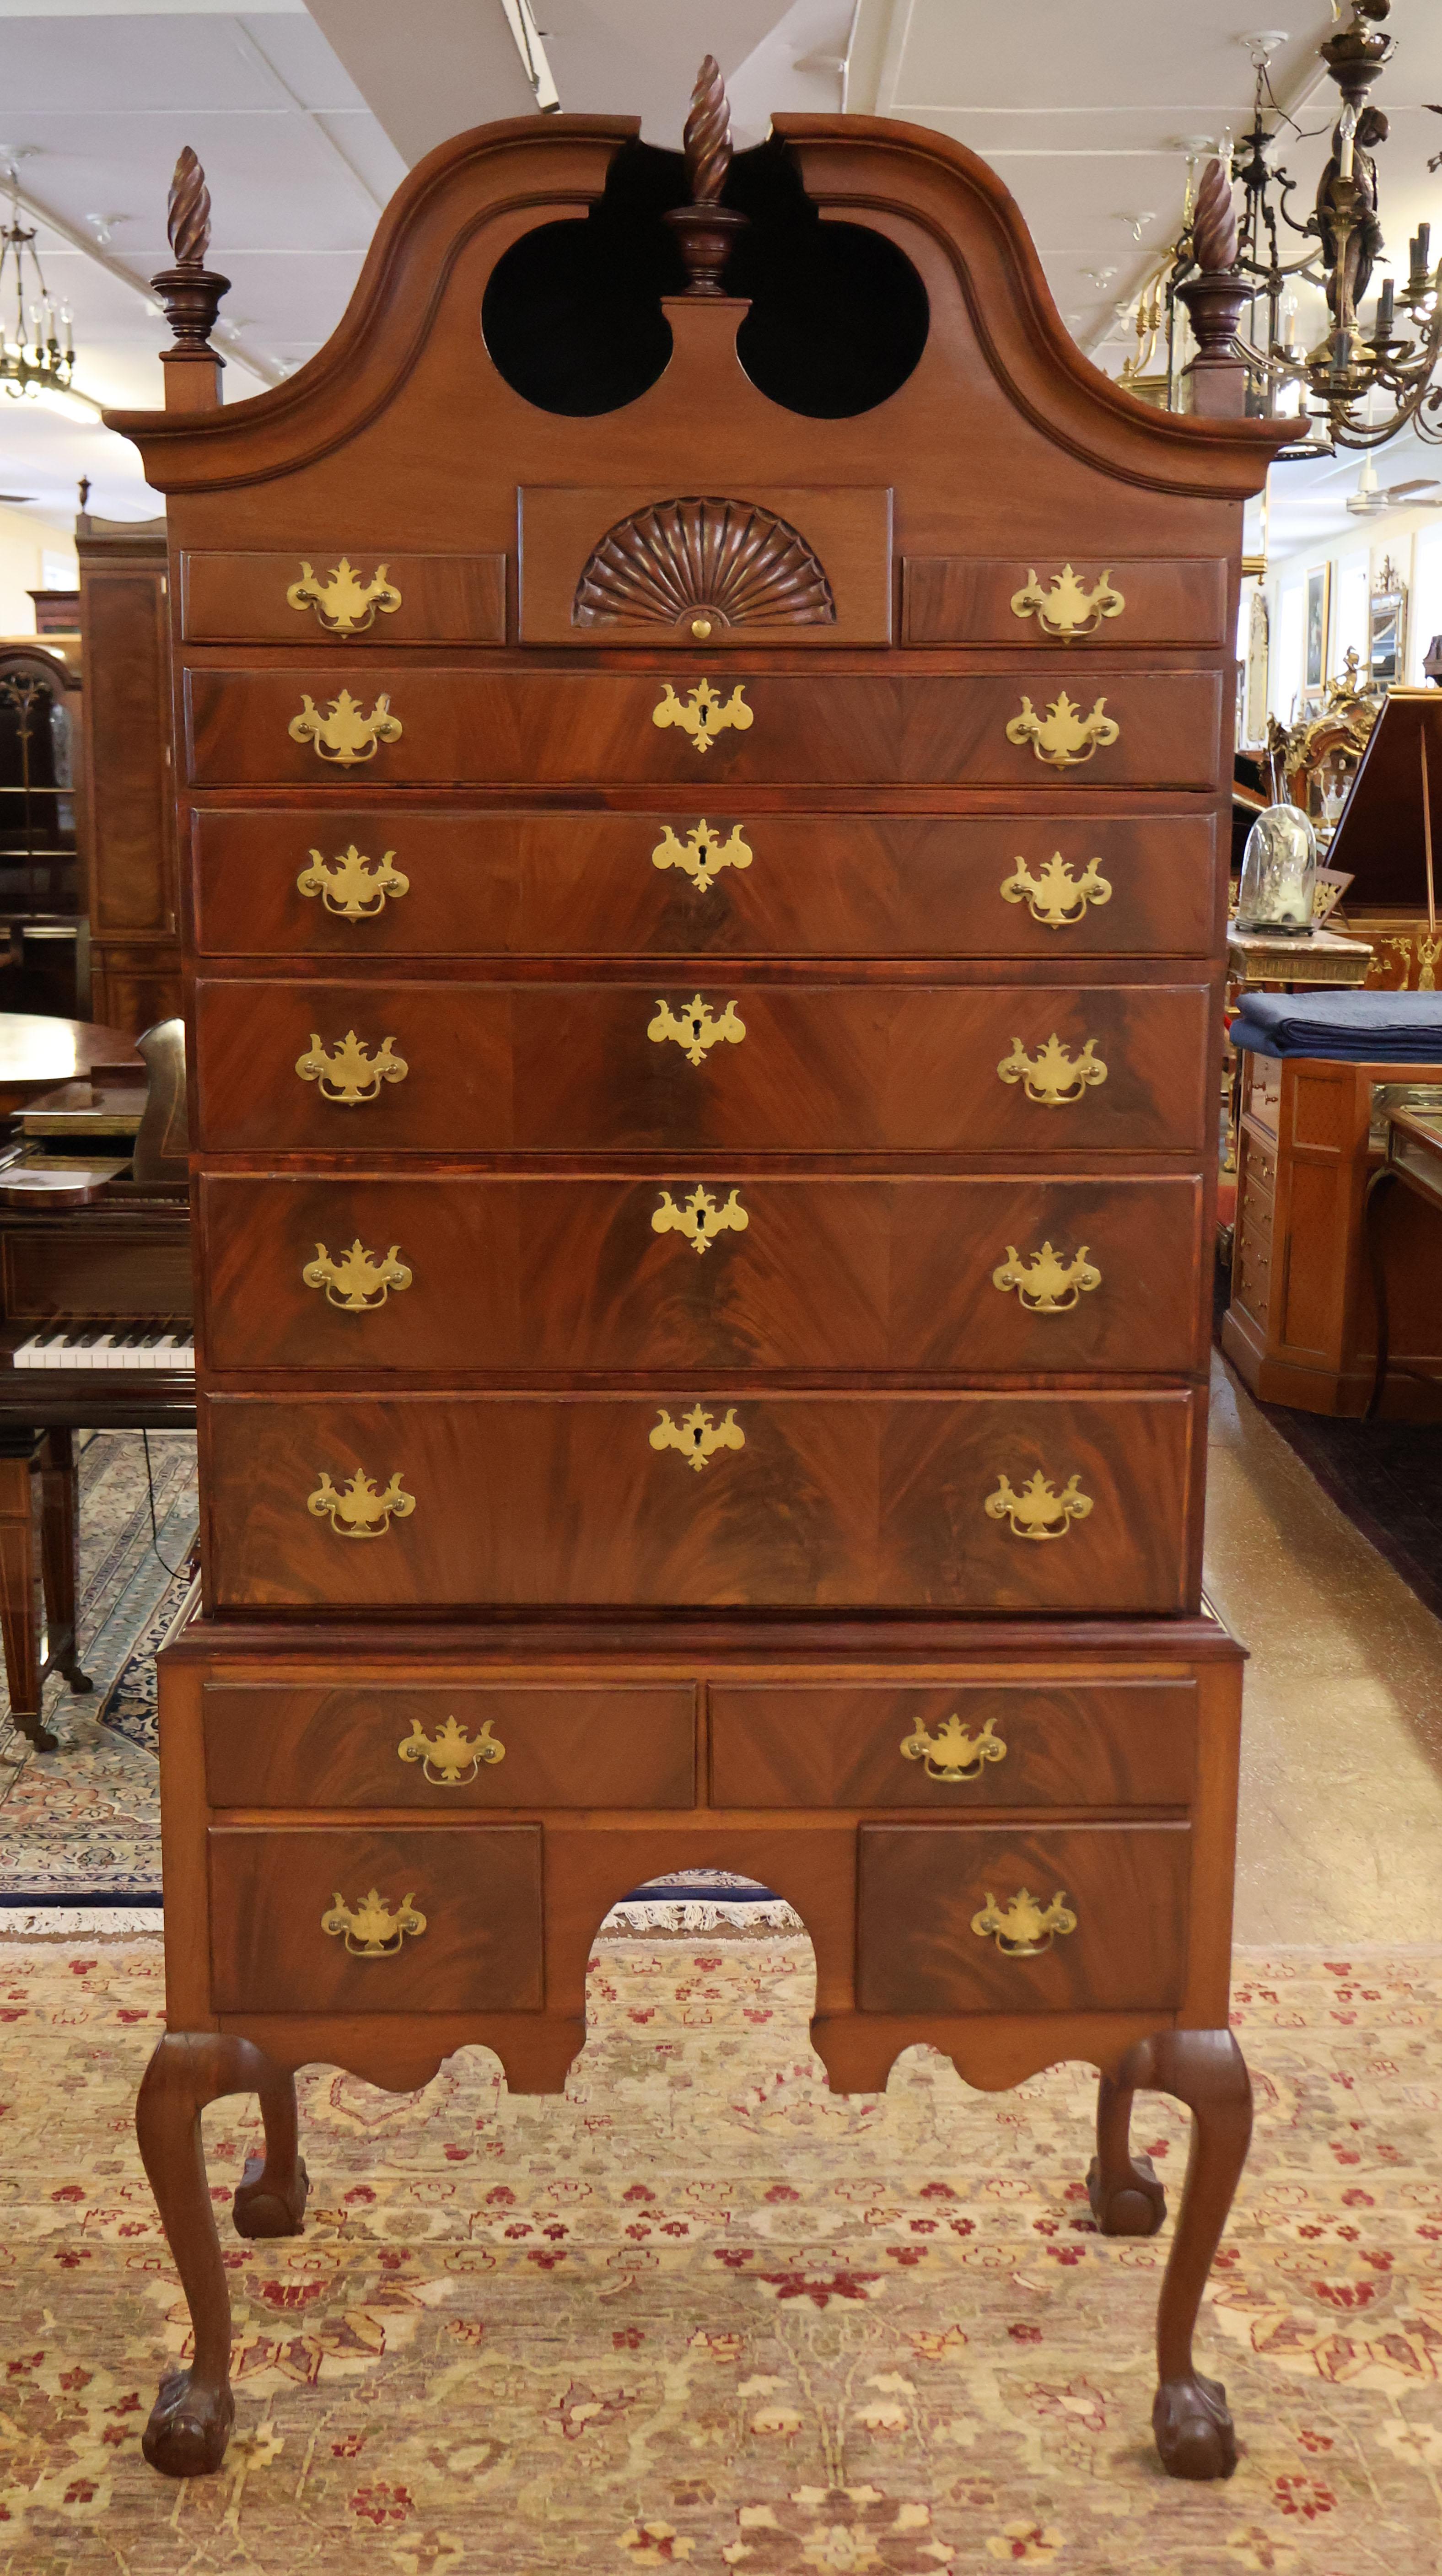 19th Century American Mahogany Chippendale Bonnet Top High Chest Highboy

Dimensions : 86